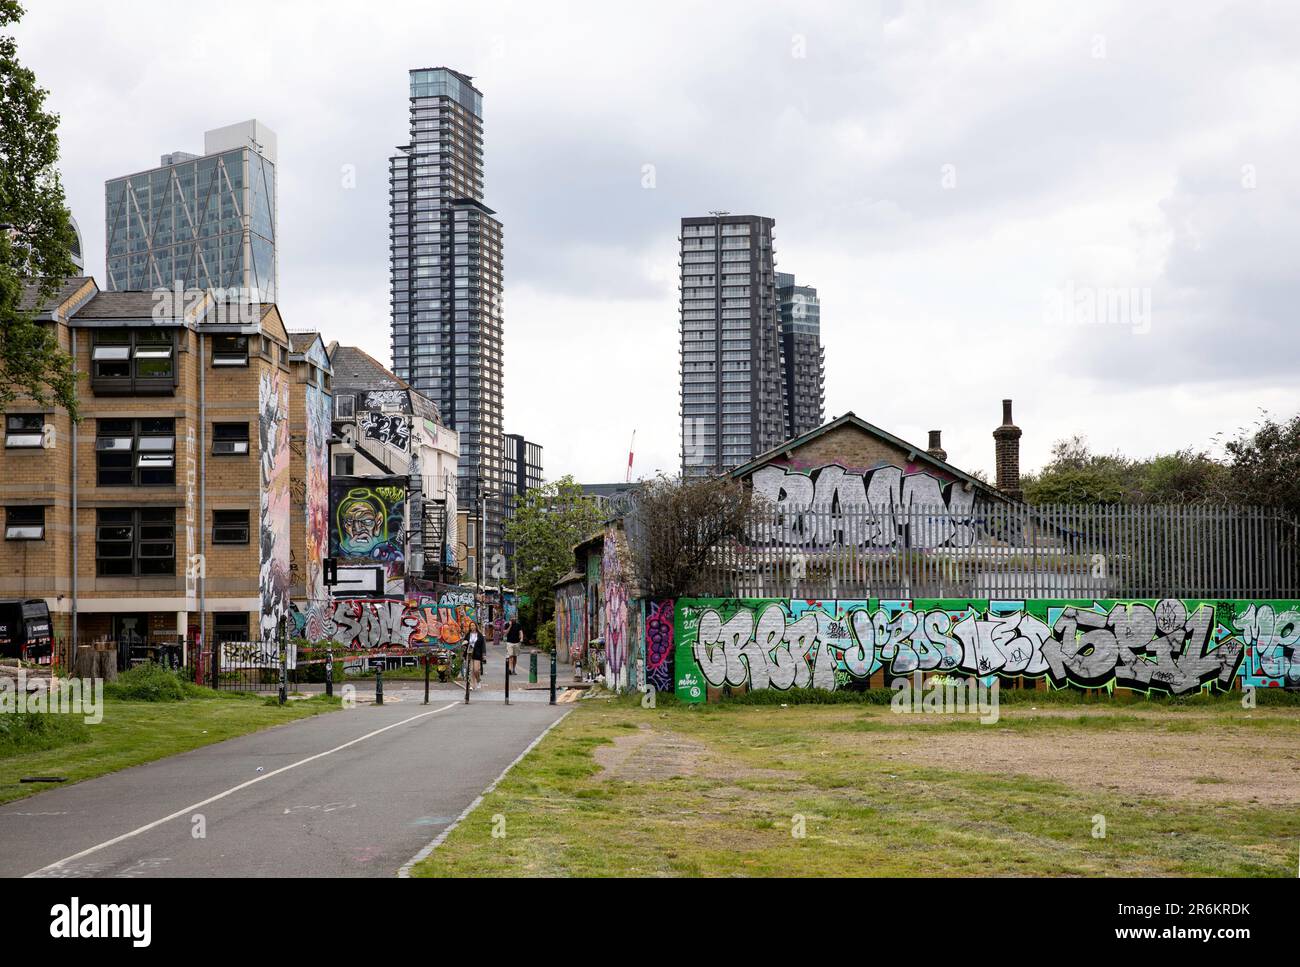 London, UK - May 17 2023: Looking towards Brick Lane from Allen Gardens in Shoreditch. The gritty inner city area is covered in graffiti. Stock Photo